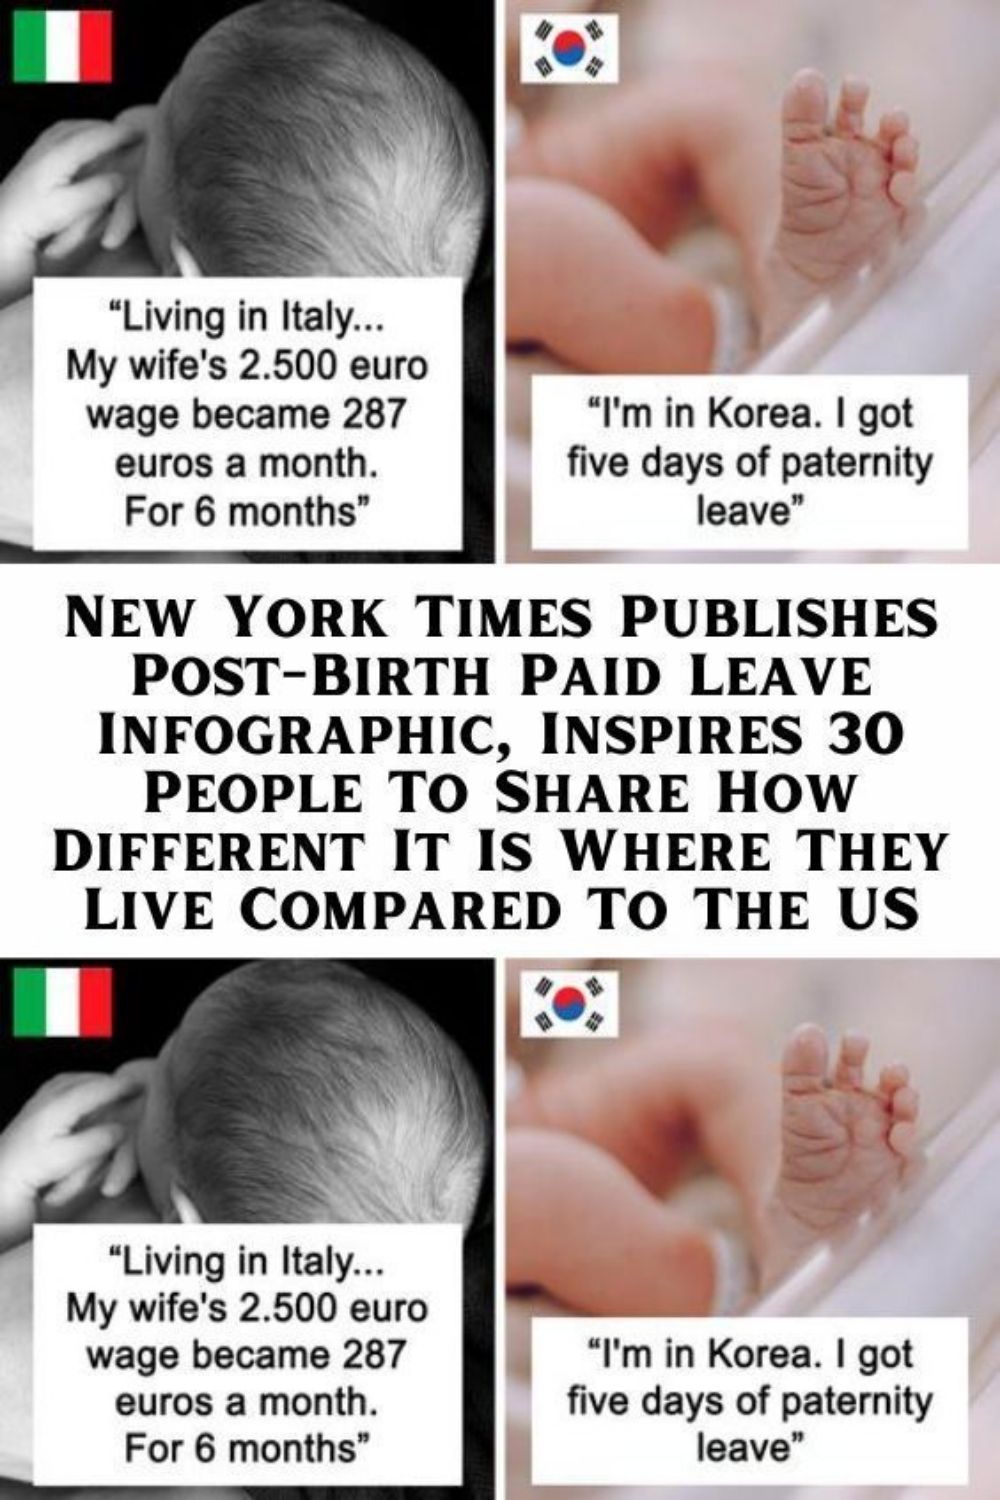 New York Times Publishes Post-Birth Paid Leave Infographic, Inspires 30 People To Share How Different It Is Where They Live Compared To The US